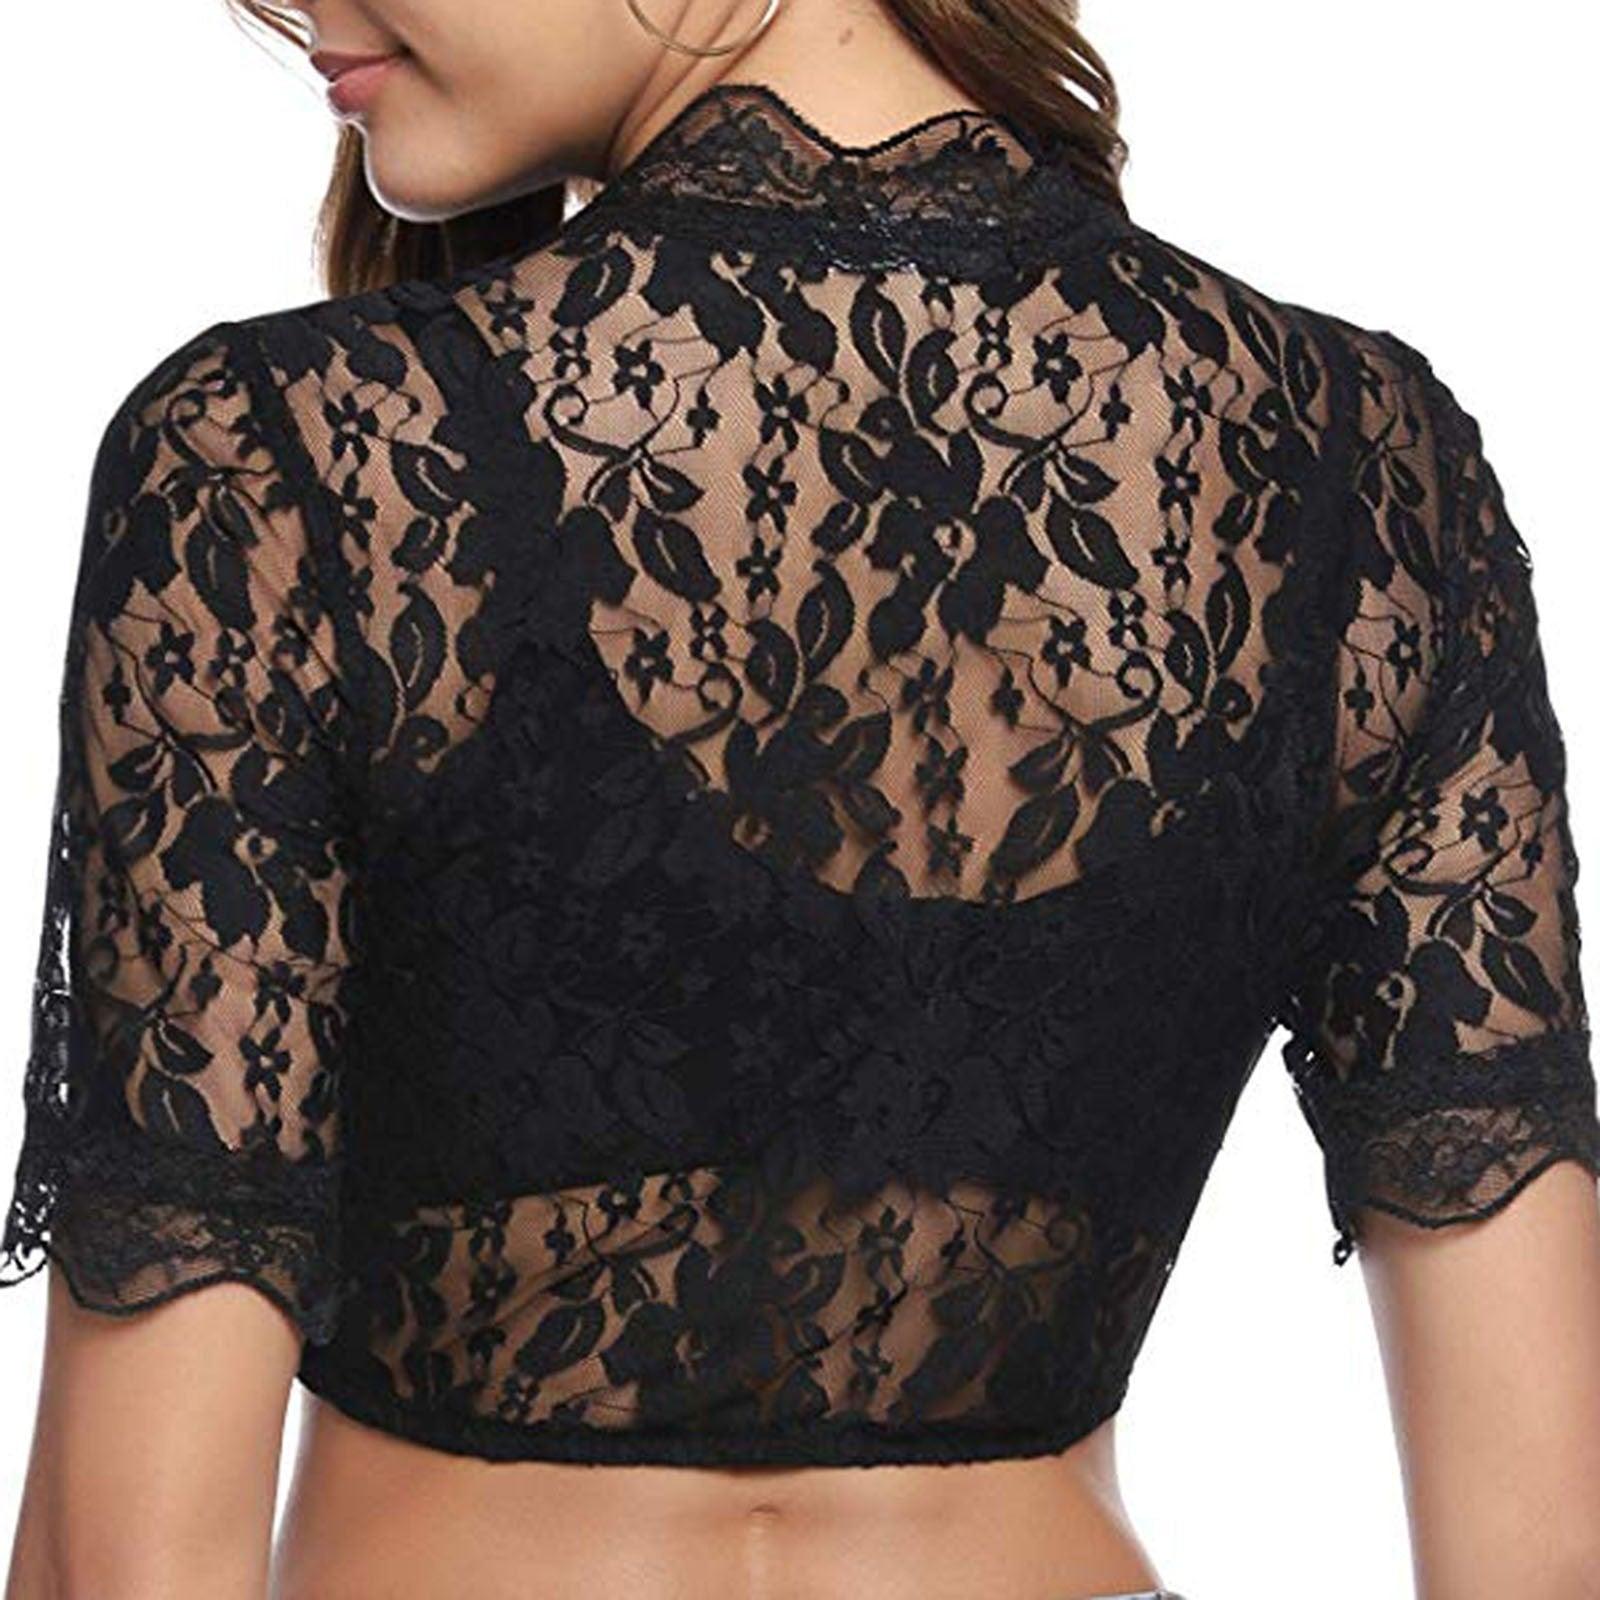 Women's Shirts - Cropped Tops Elegant Petite Lingerie Jacket For Women Sexy